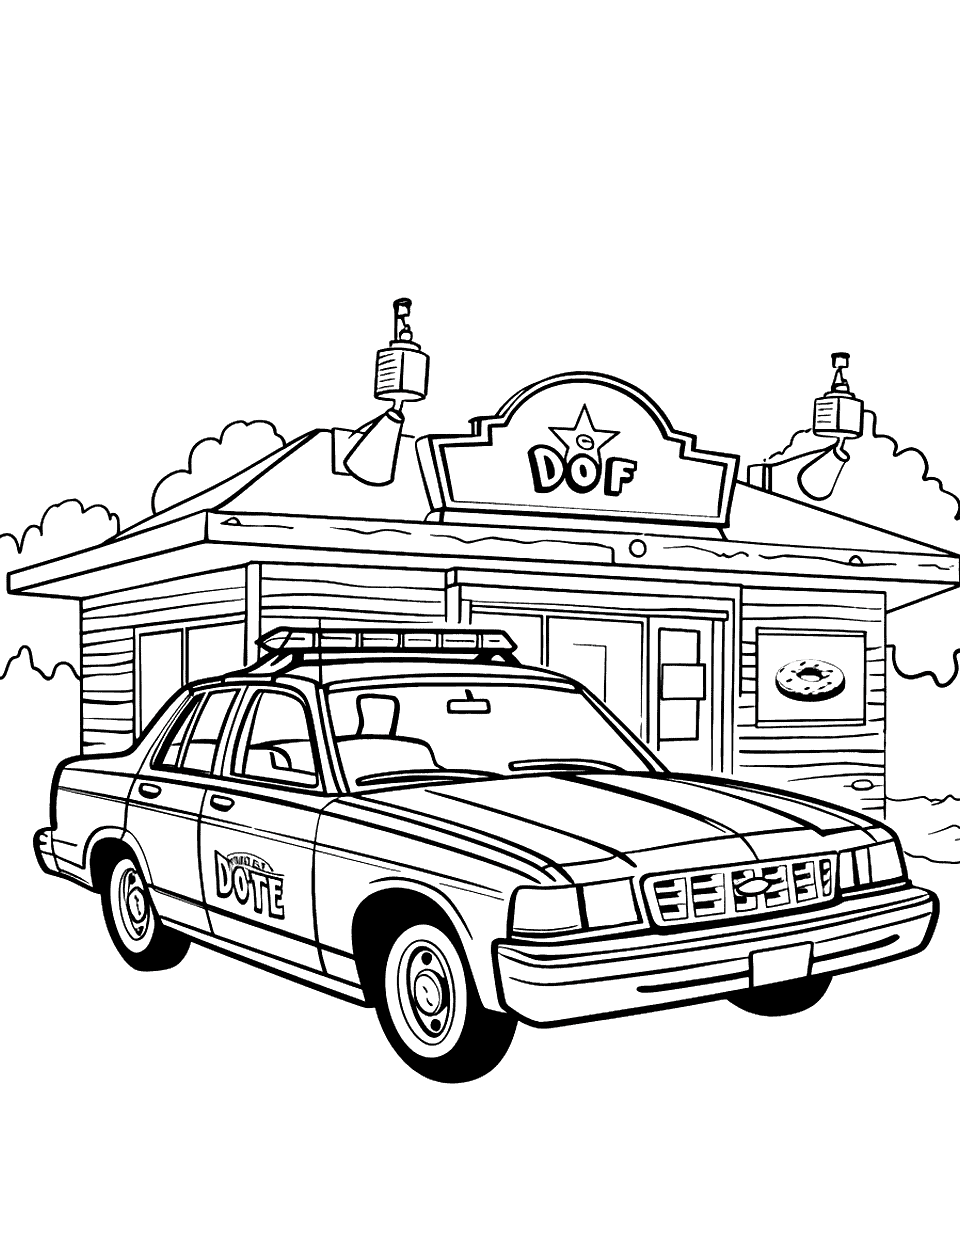 Parked at the Donut Shop Police Car Coloring Page - A humorous scene of a police car parked outside a donut shop.